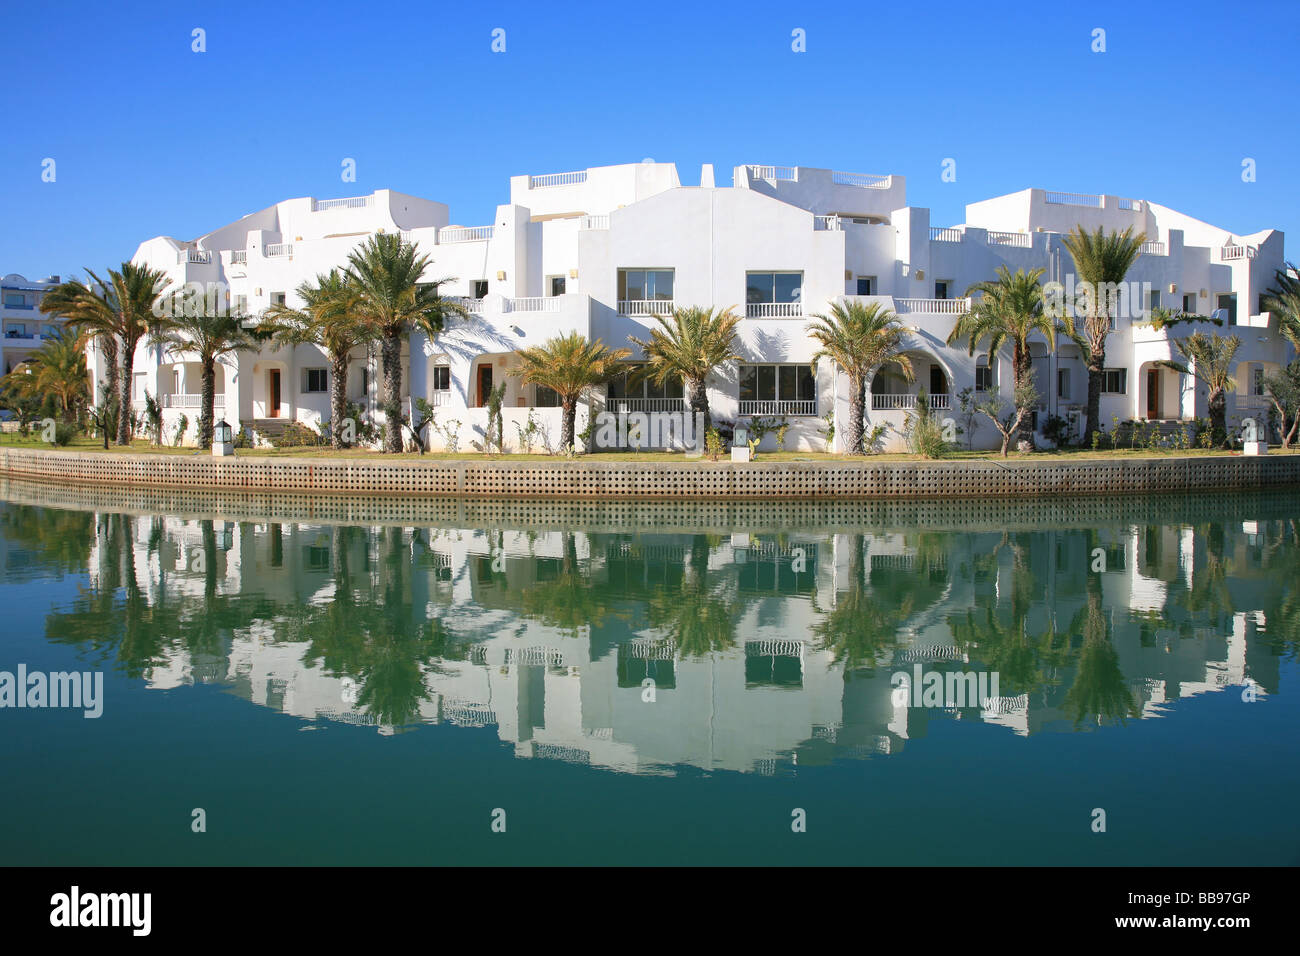 White holiday villas along a canal in Hammamet, Tunisia Stock Photo